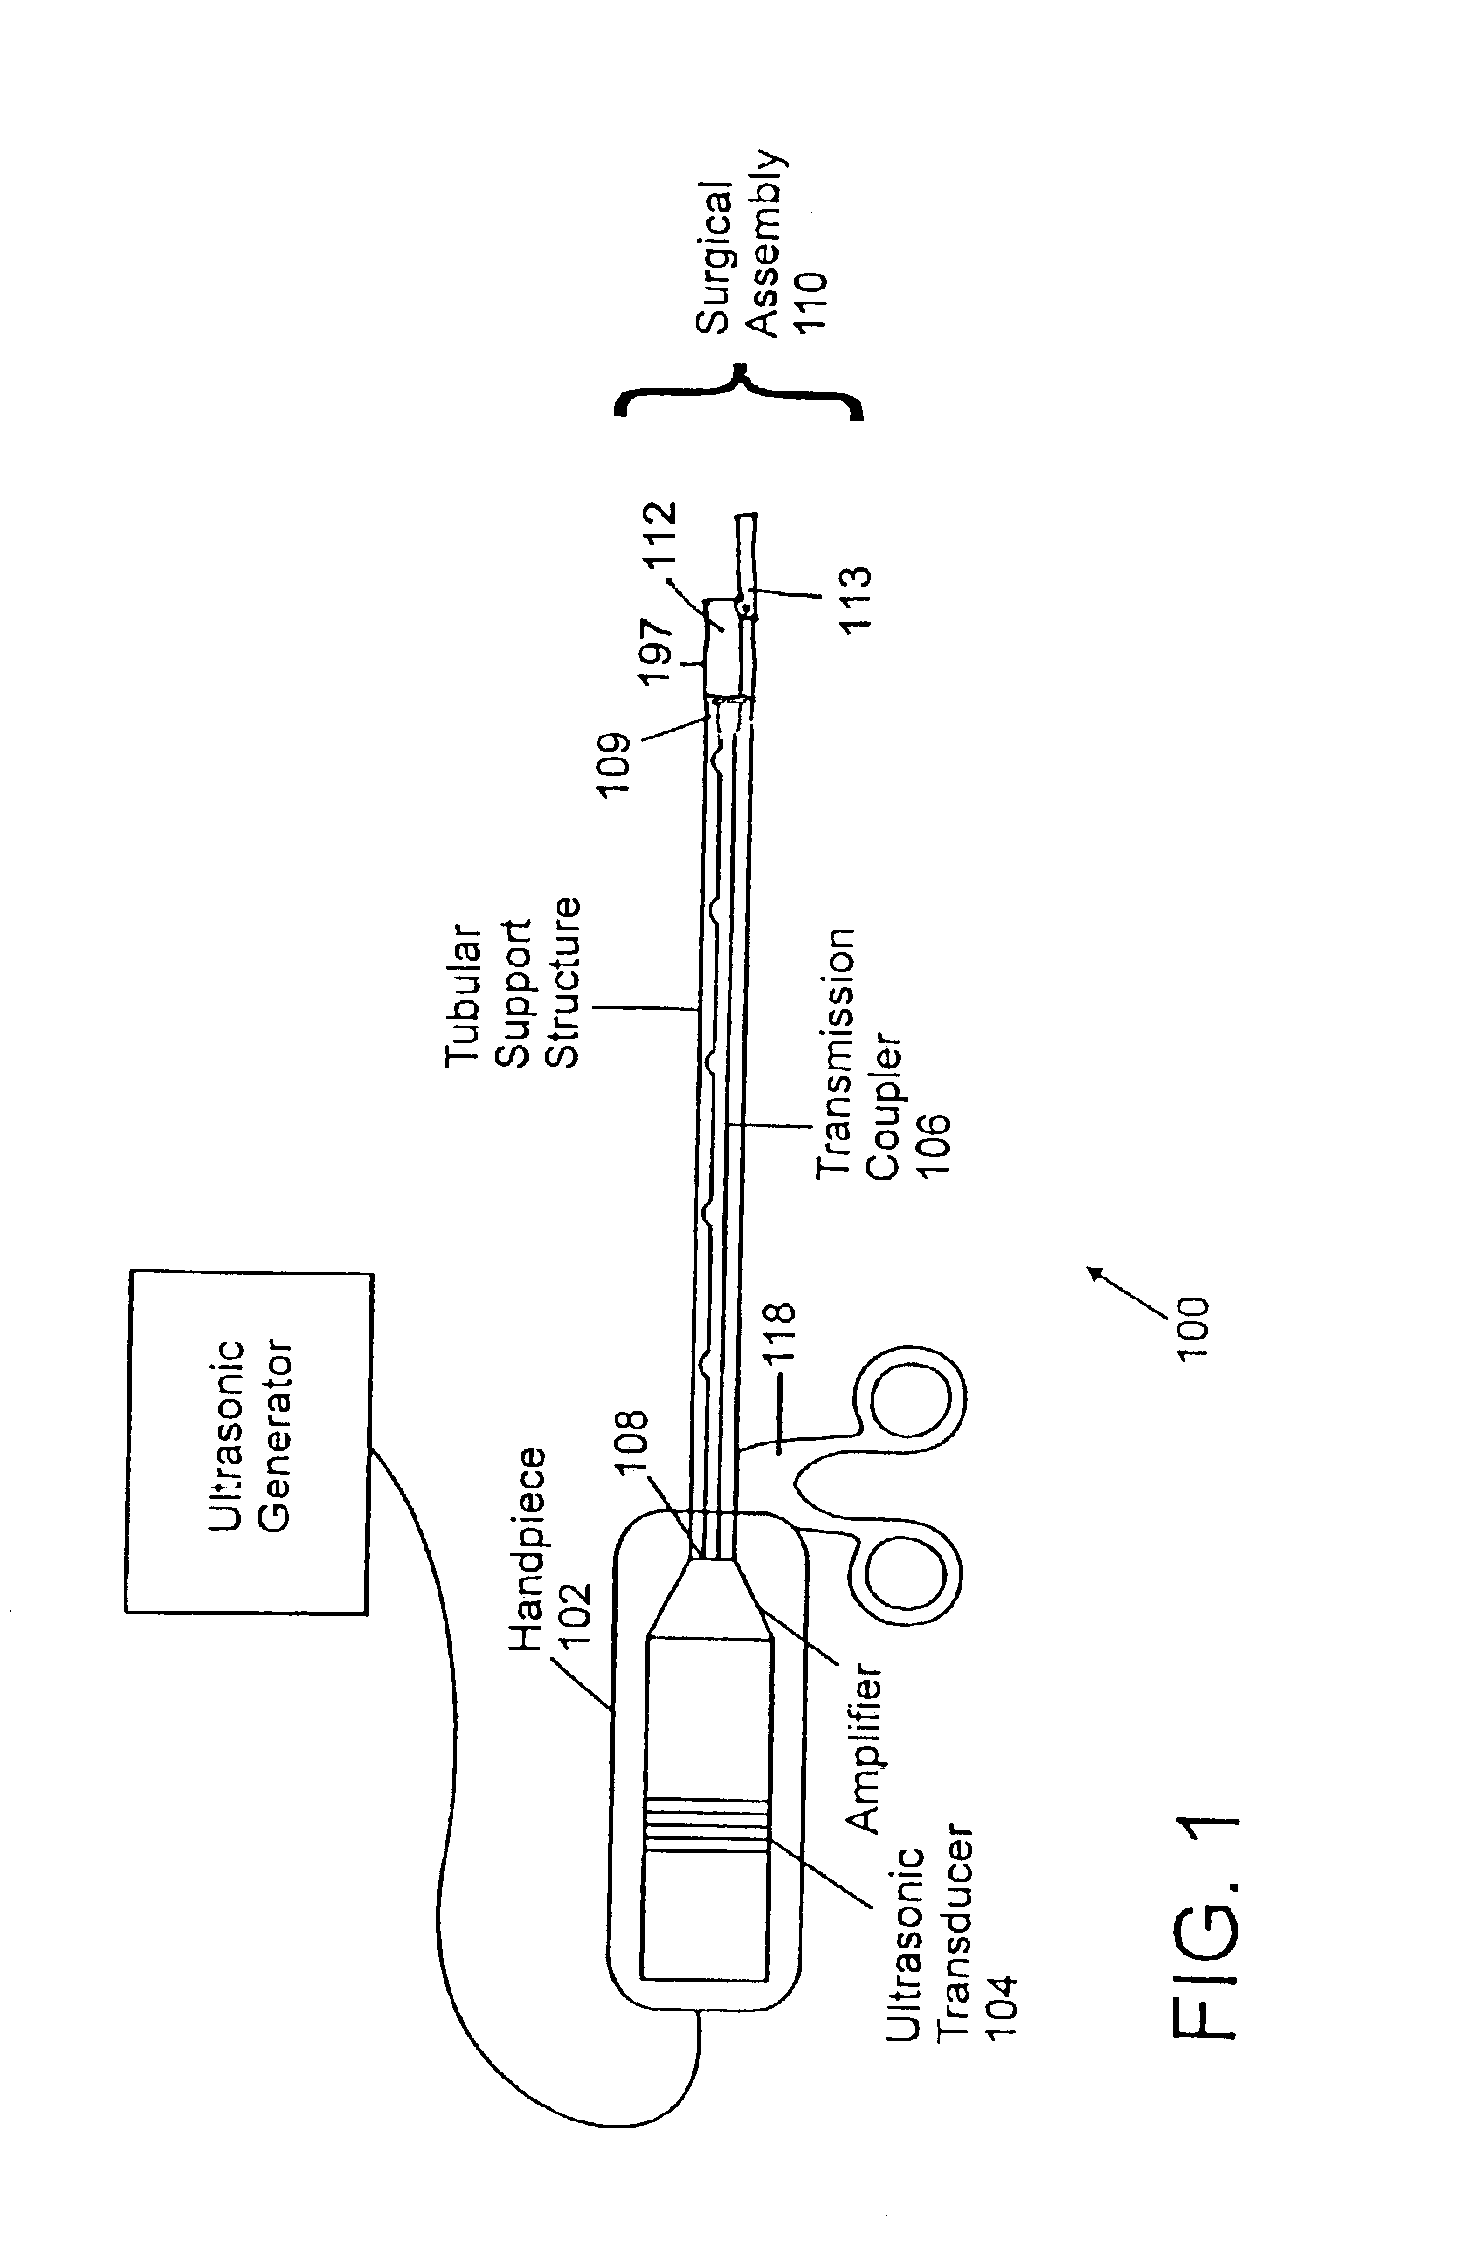 Ultrasonic soft tissue cutting and coagulation systems including a retractable grasper